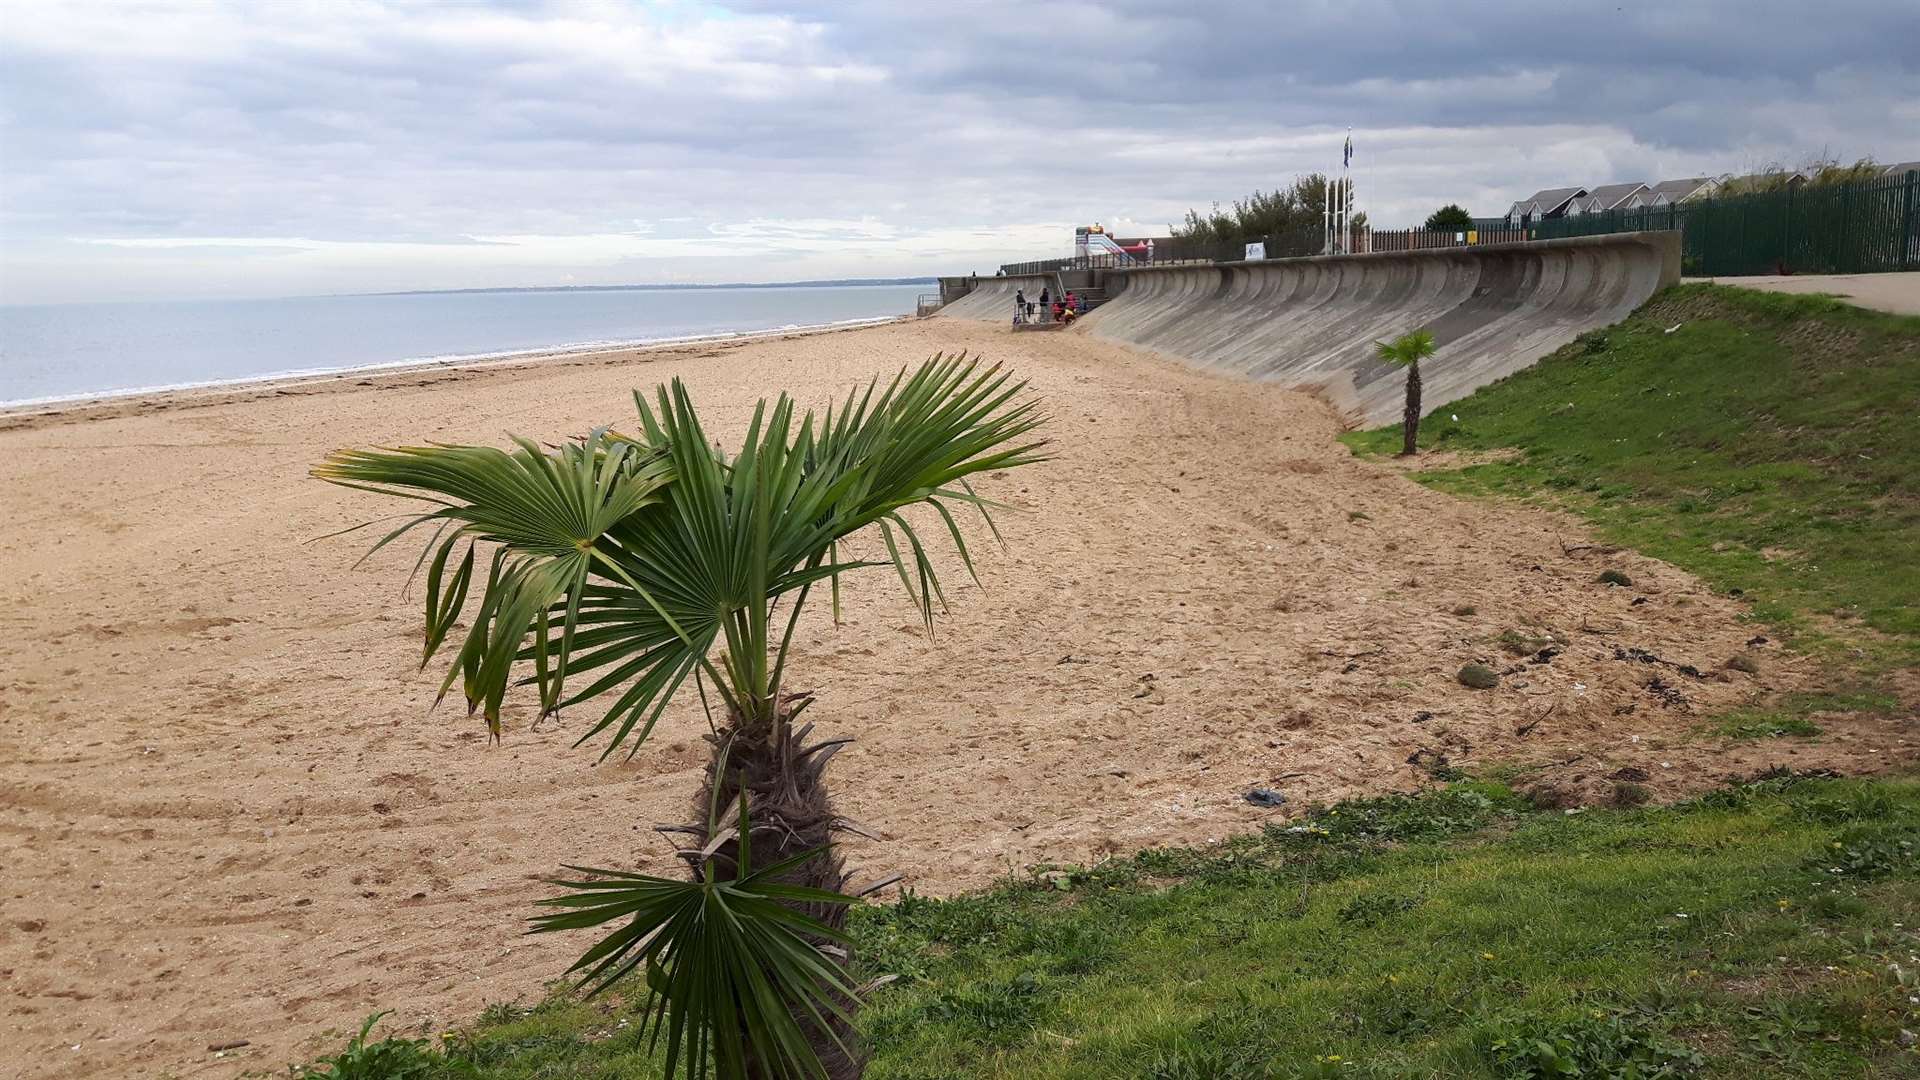 Palm trees have been planted on the beach at Leysdown on the Isle of Sheppey